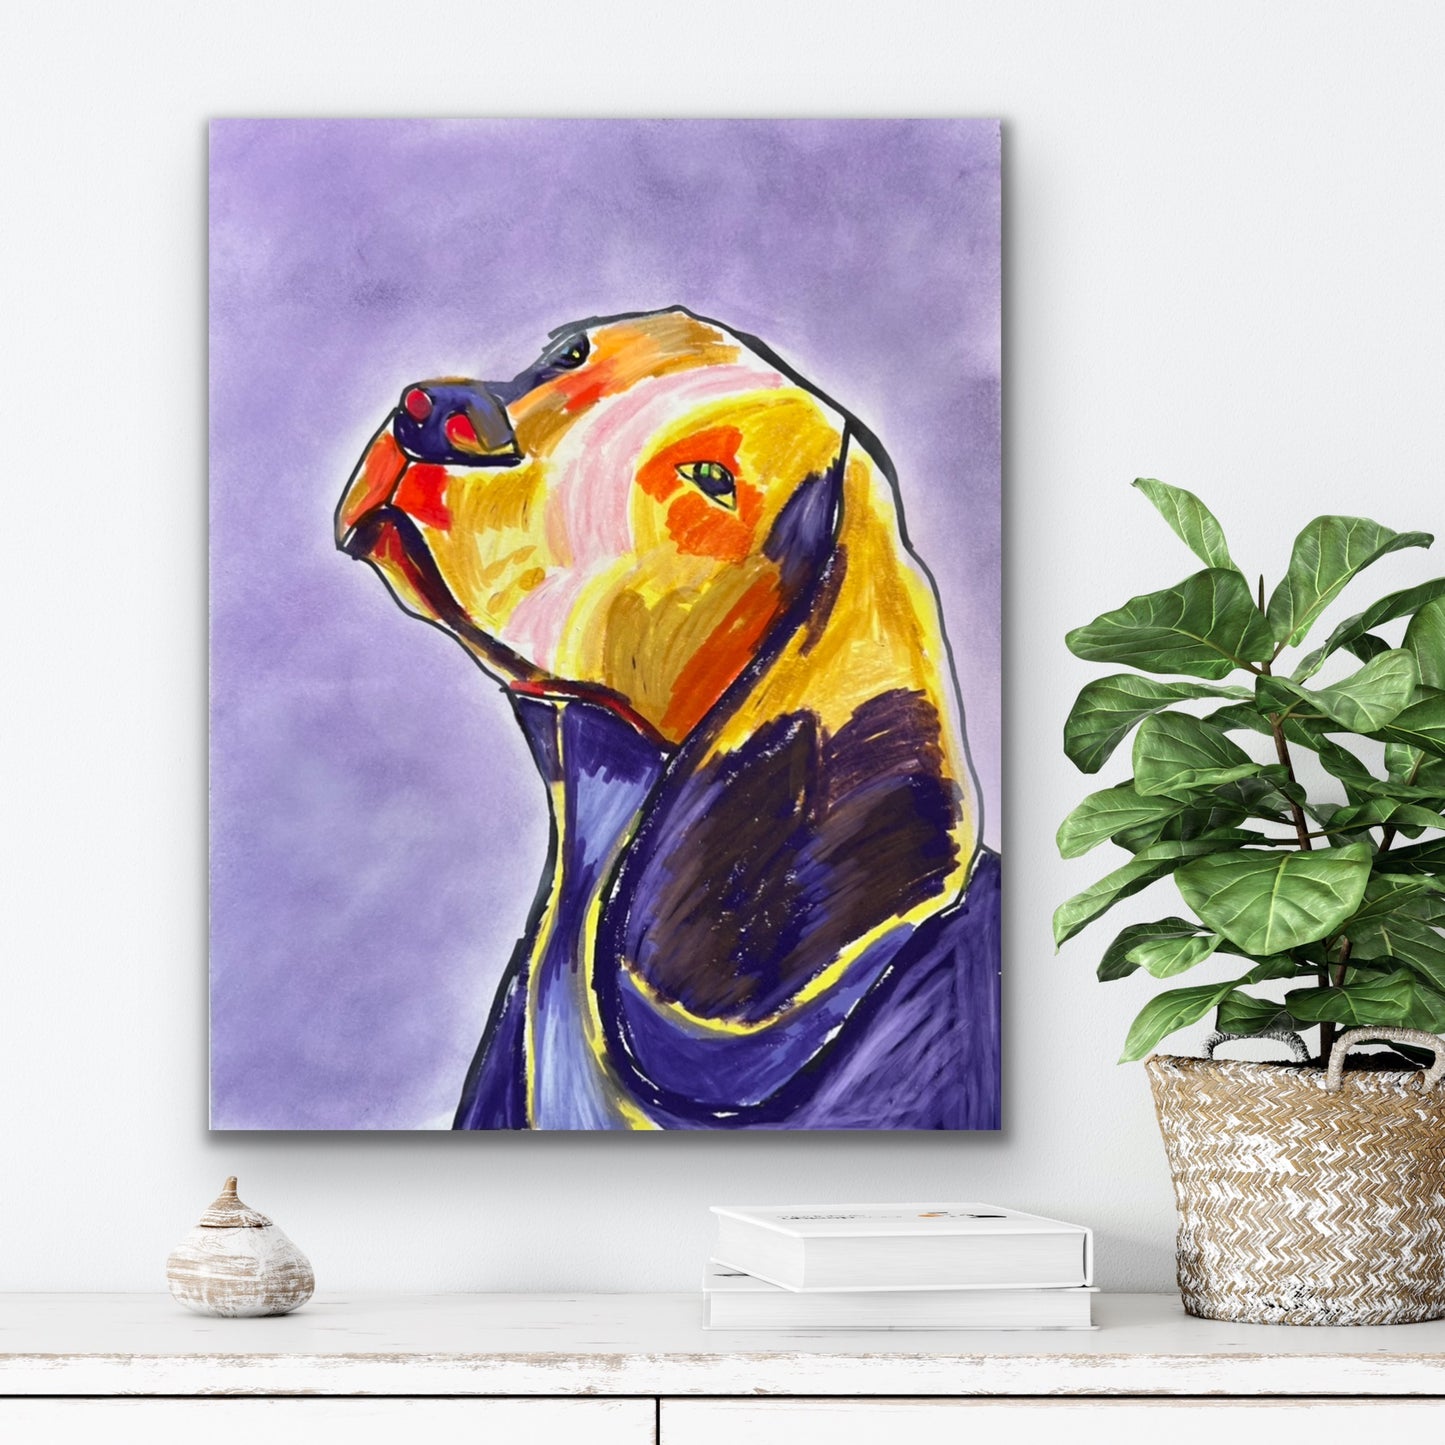 Beagle - Stretched Canvas Print in more sizes